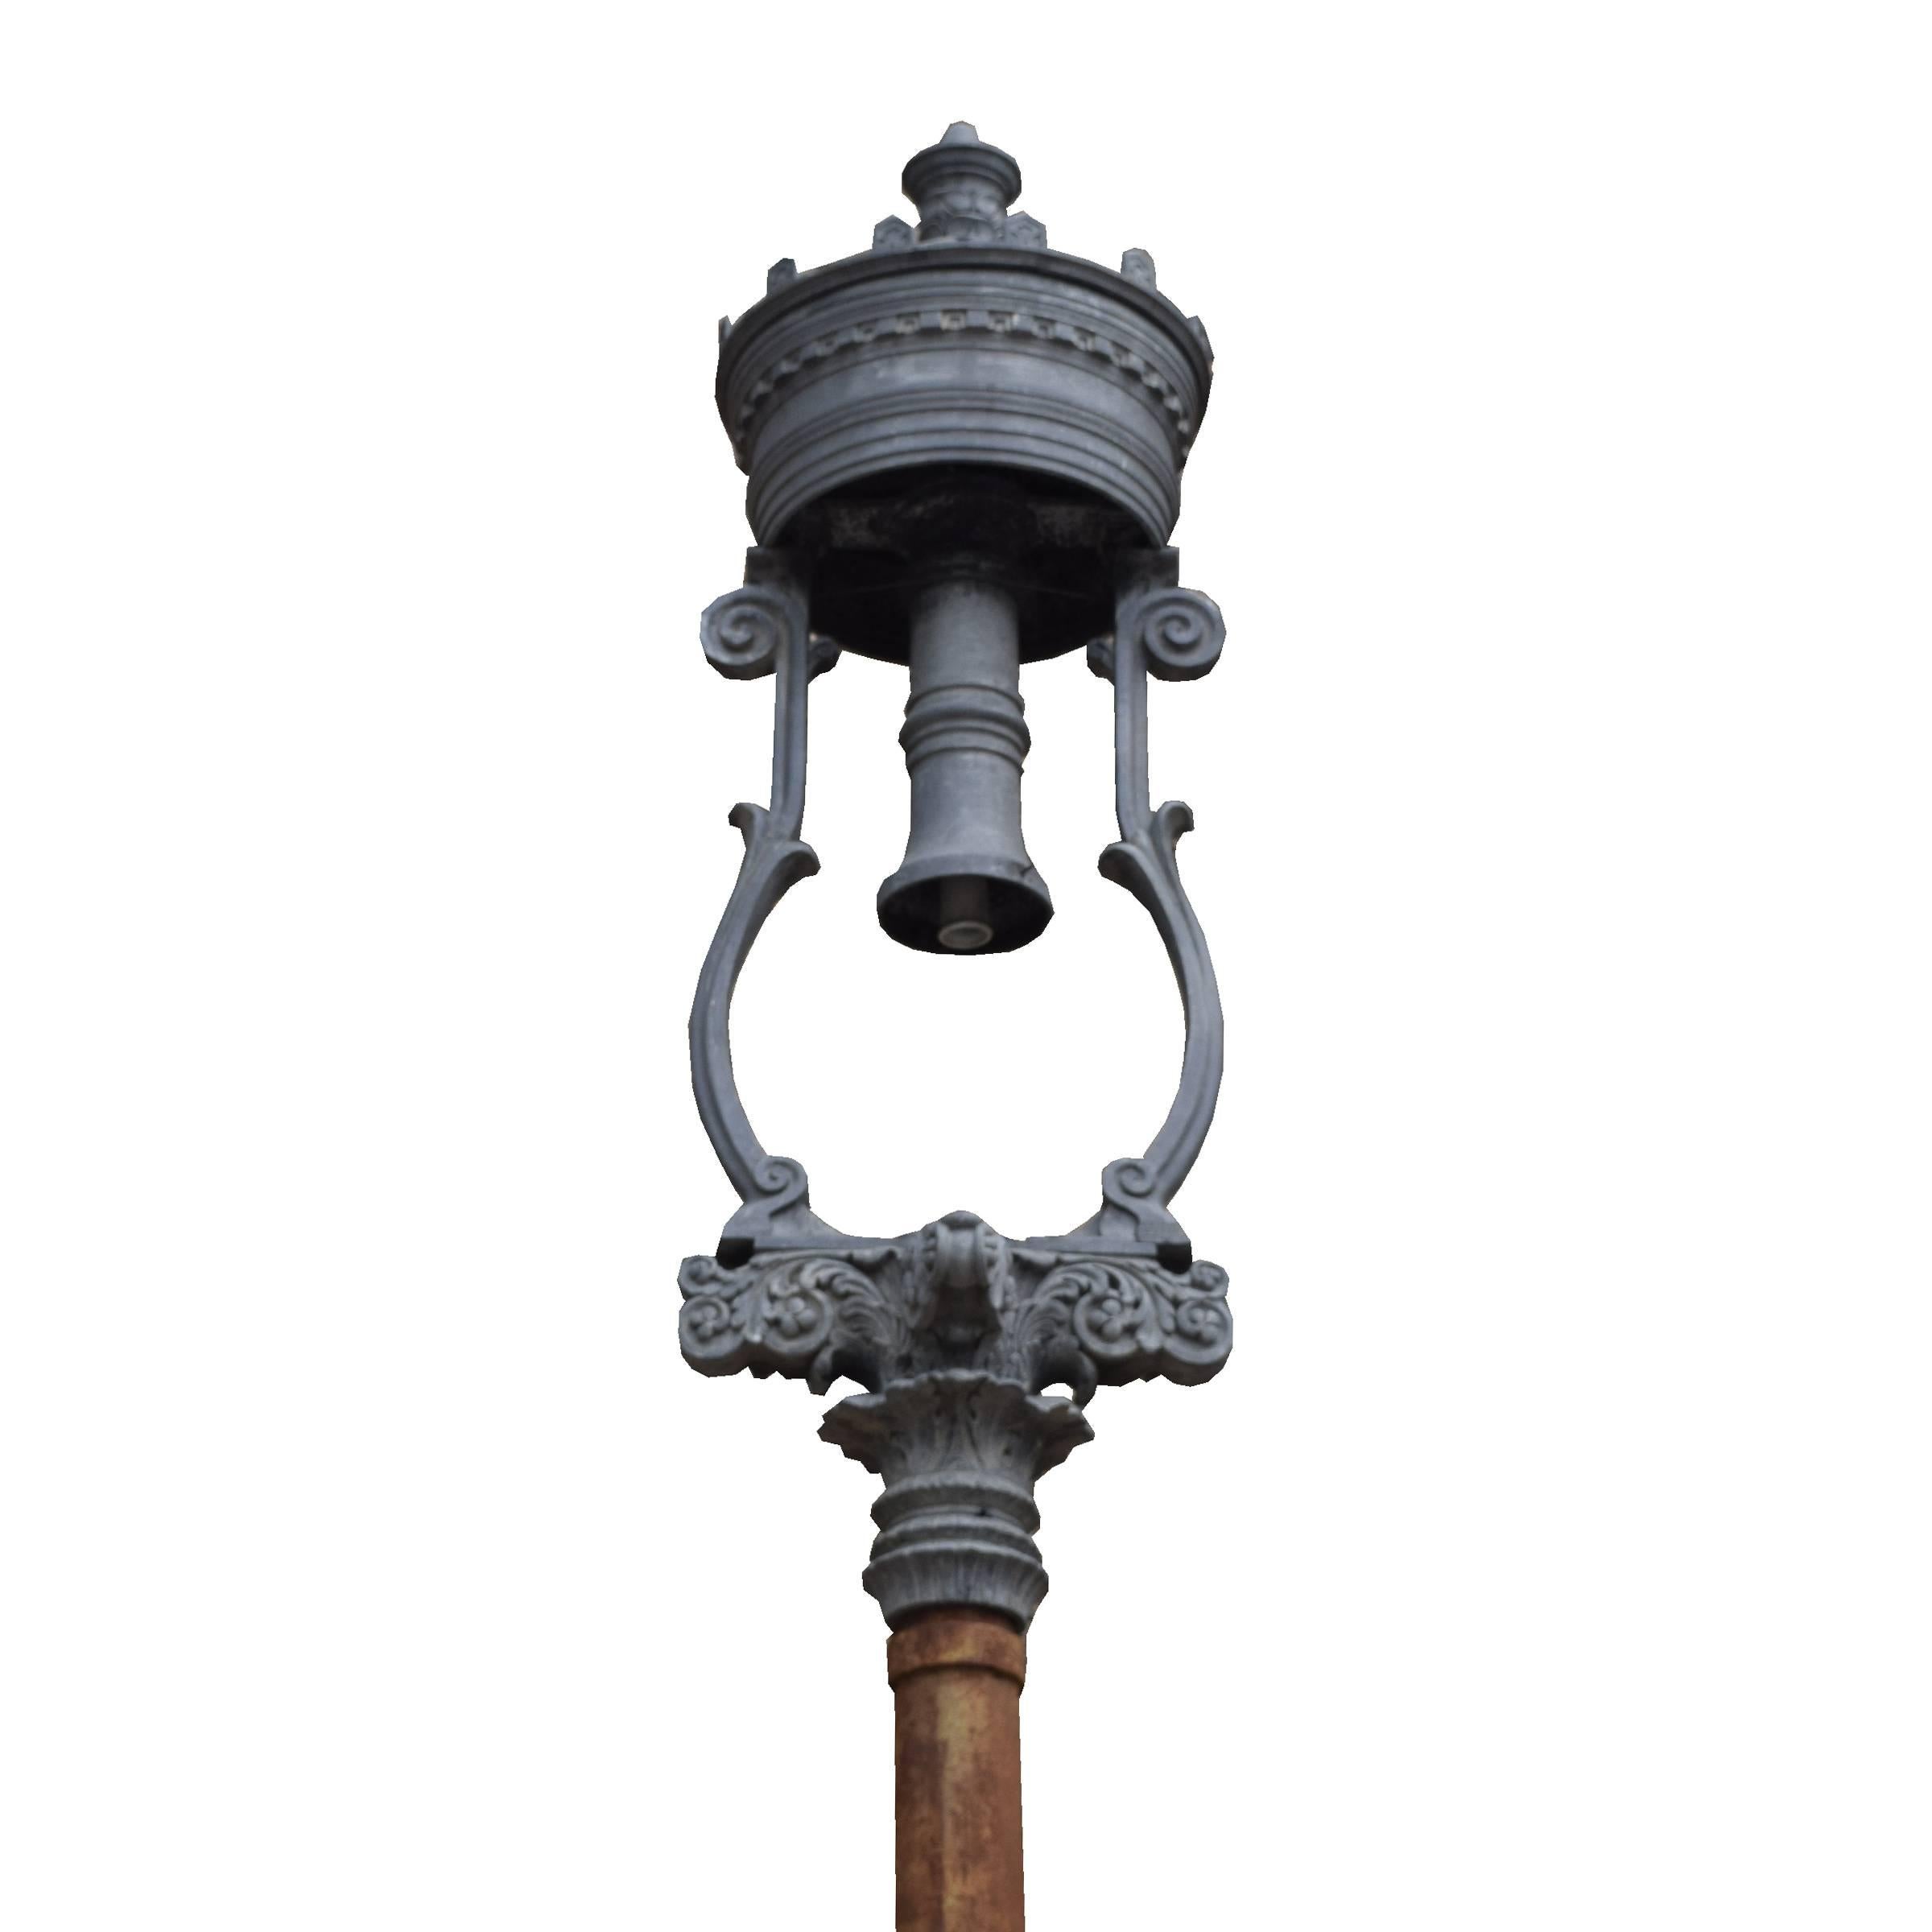 An original lamp post from the Chicago World's Columbian Exposition, 1893. This electric lamp post helped give the fair the nickname 